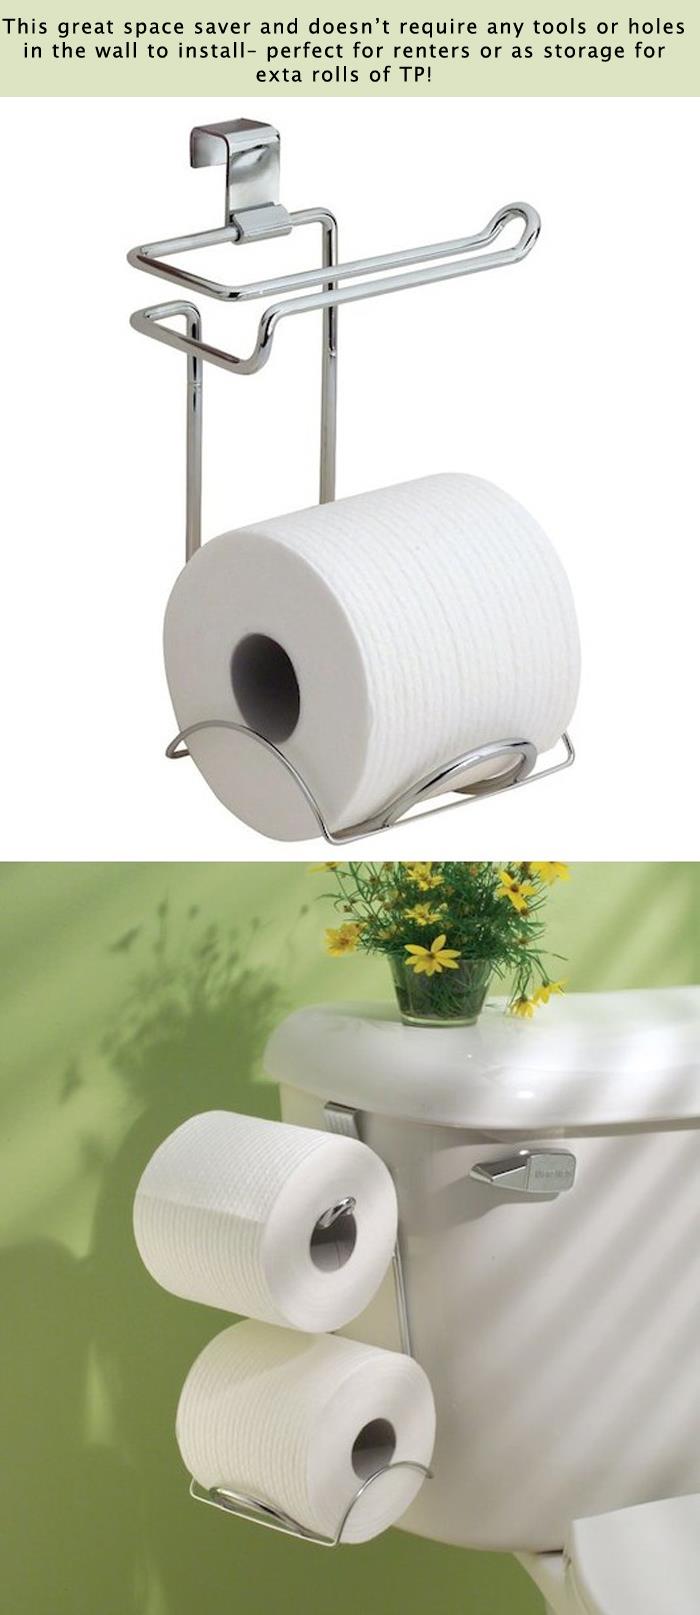 Over-The-Tank TP Holder